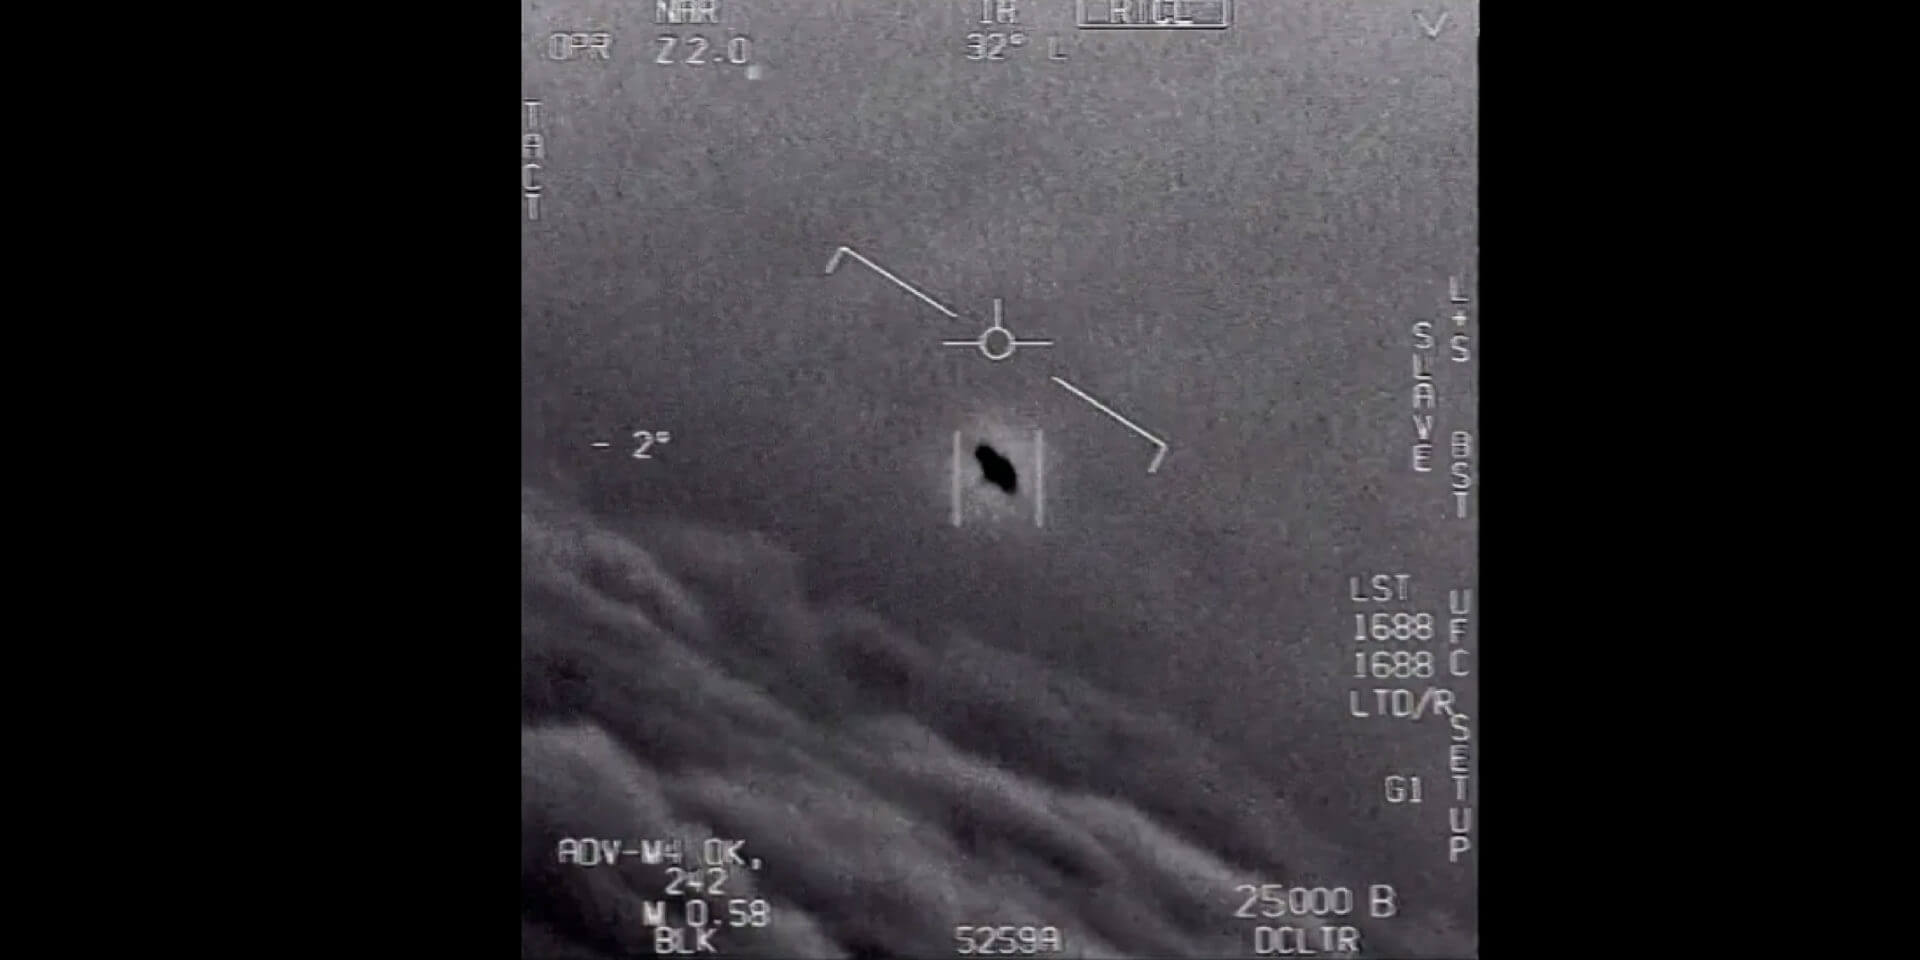 UFOs: ‘These objects show physics we don’t understand’